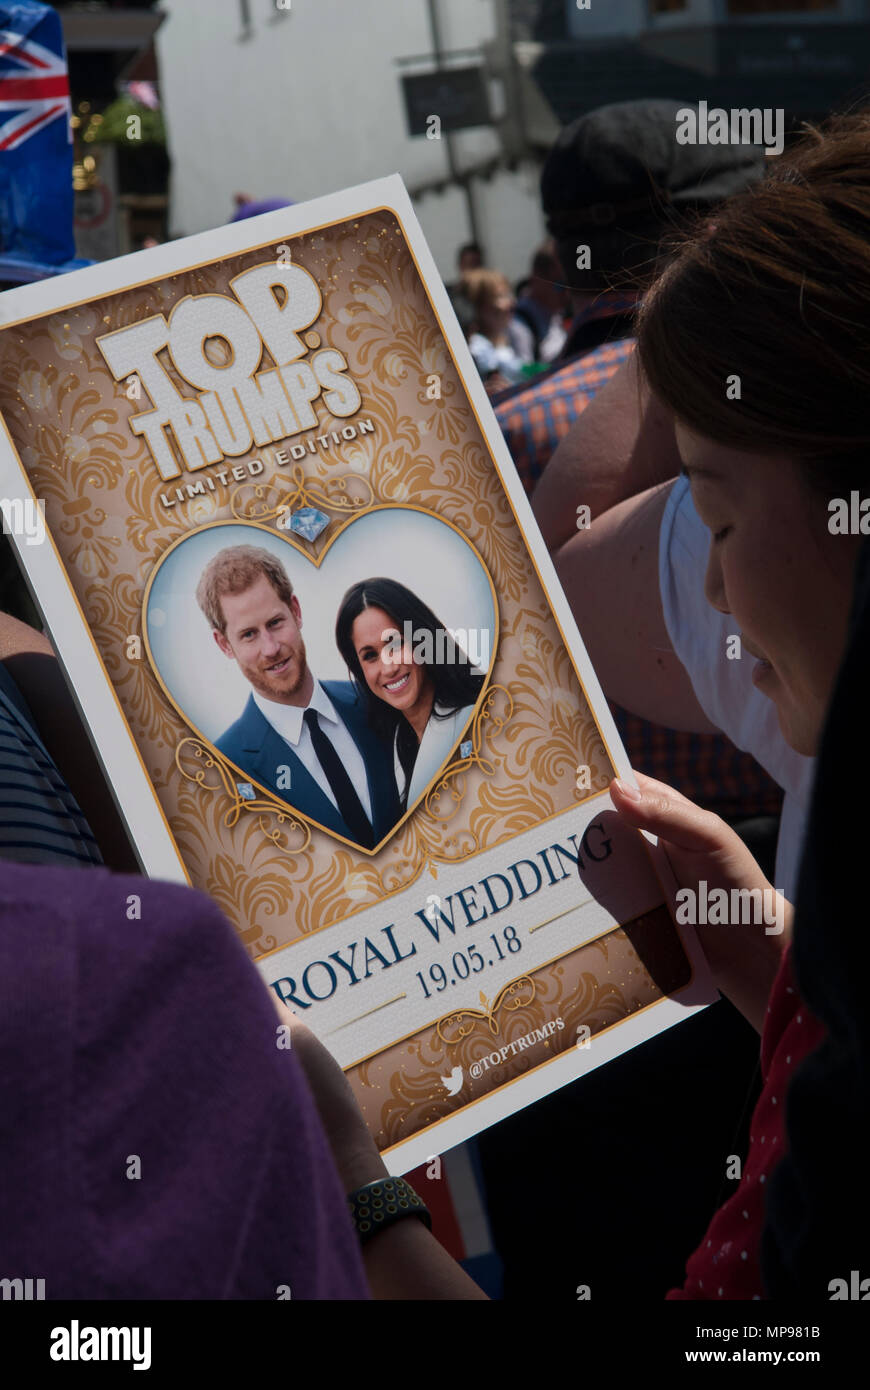 Royal wedding 19 May 2018 Prince Harry Meghan Markle  the Duke and Duchess of Sussex poster Windsor, England 2010s UK  HOMER SYKES Stock Photo